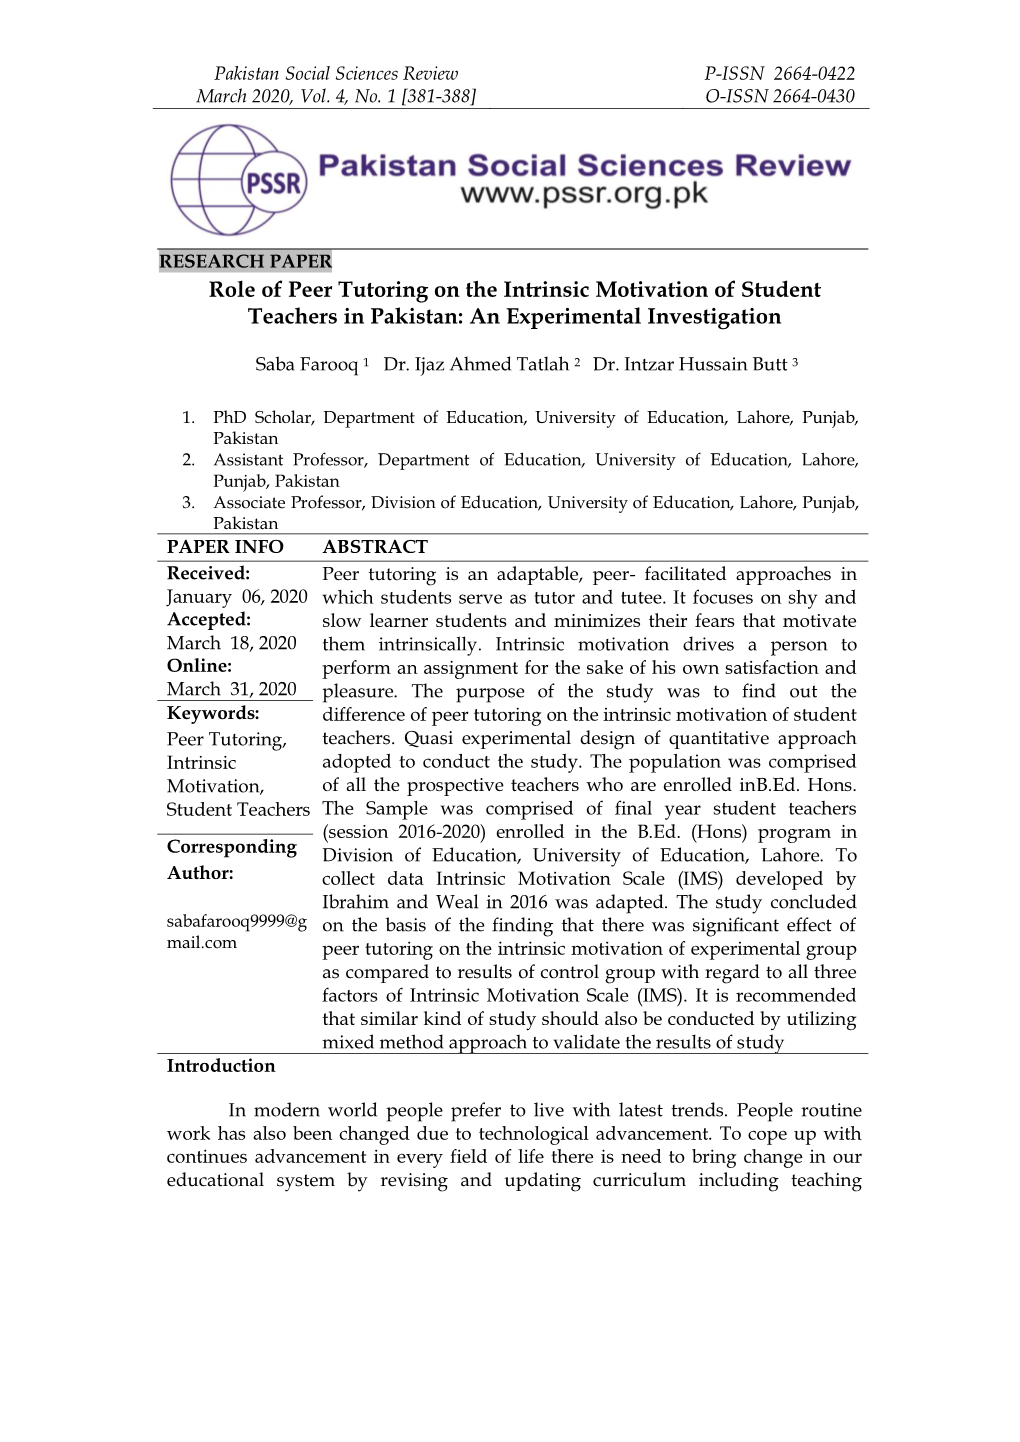 Role of Peer Tutoring on the Intrinsic Motivation of Student Teachers in Pakistan: an Experimental Investigation